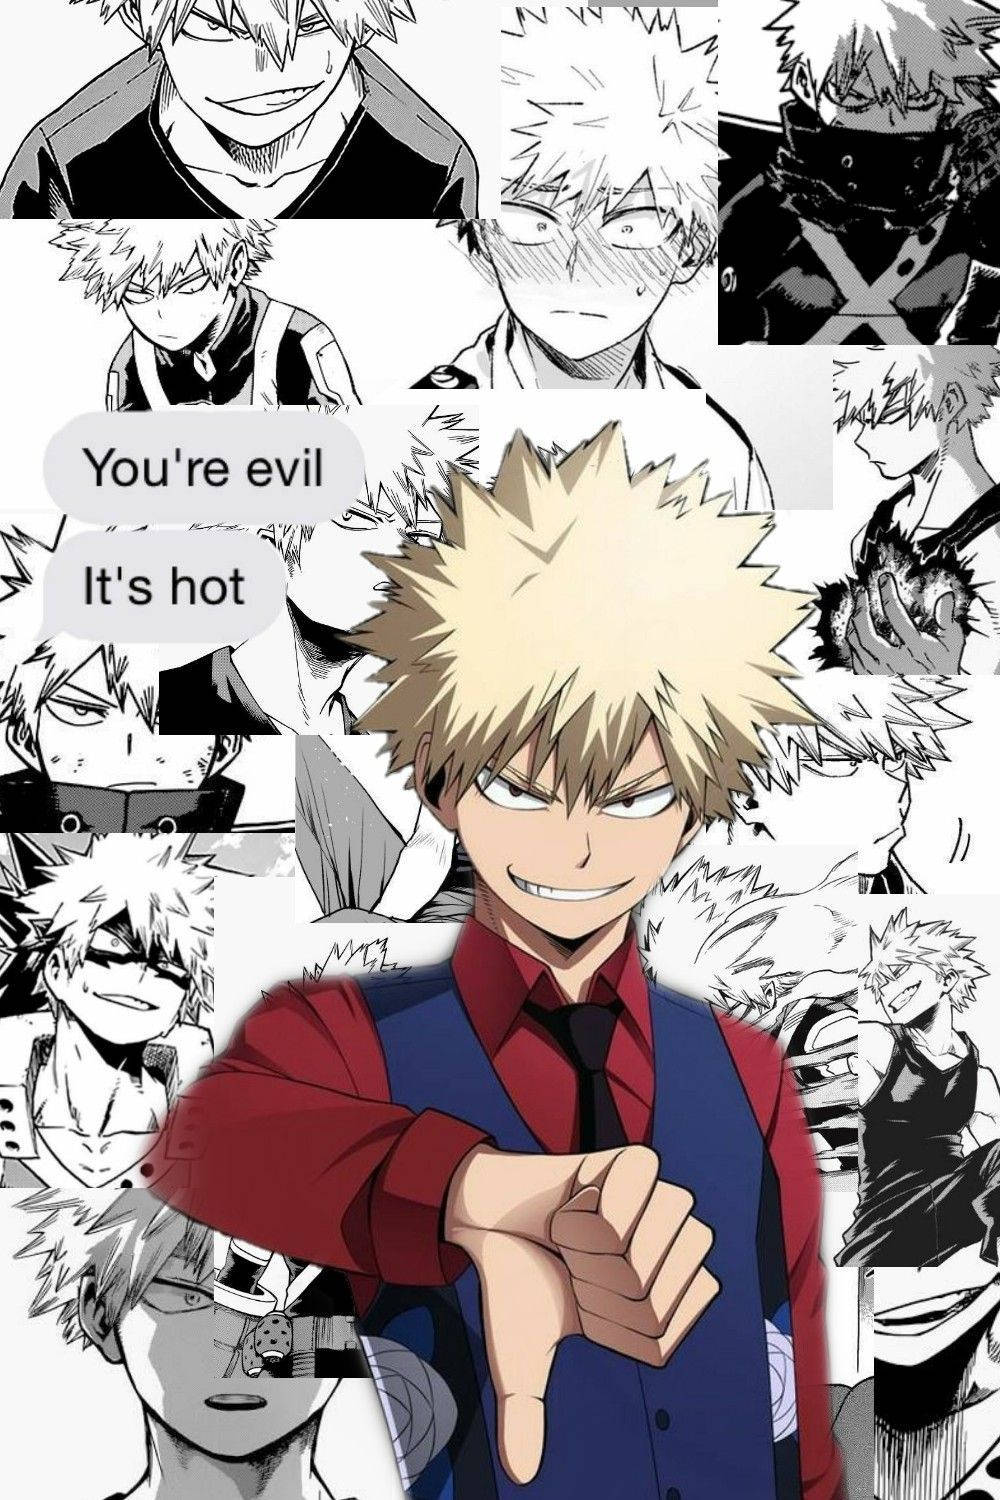 Cute Bakugou melting hearts with his adorably playful expression Wallpaper